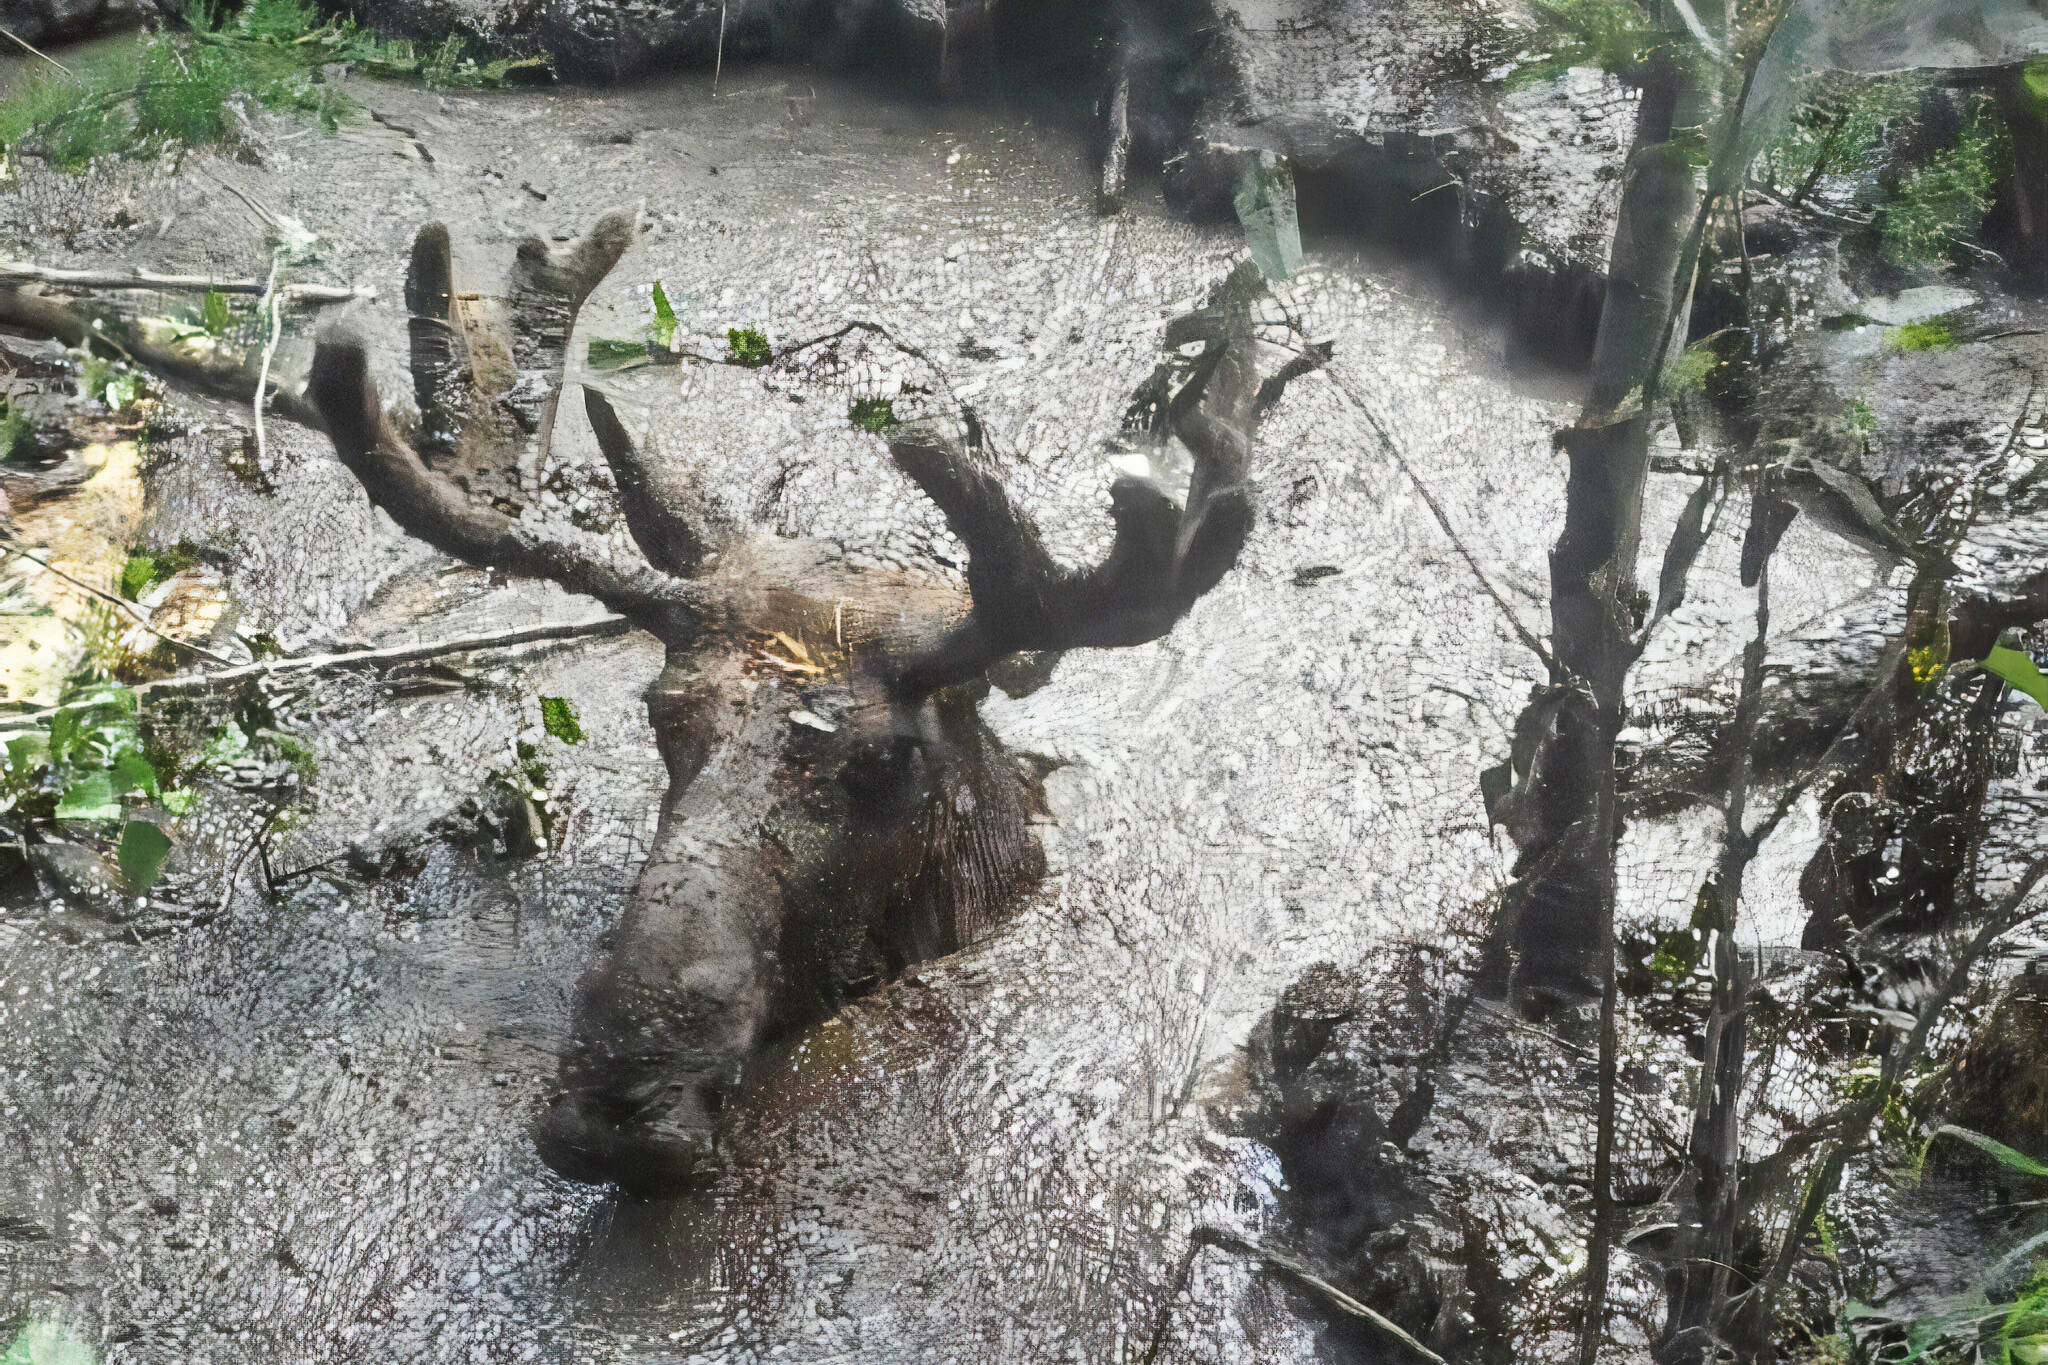 70-year-old men rescue muddy moose from certain death in Ontario swamp